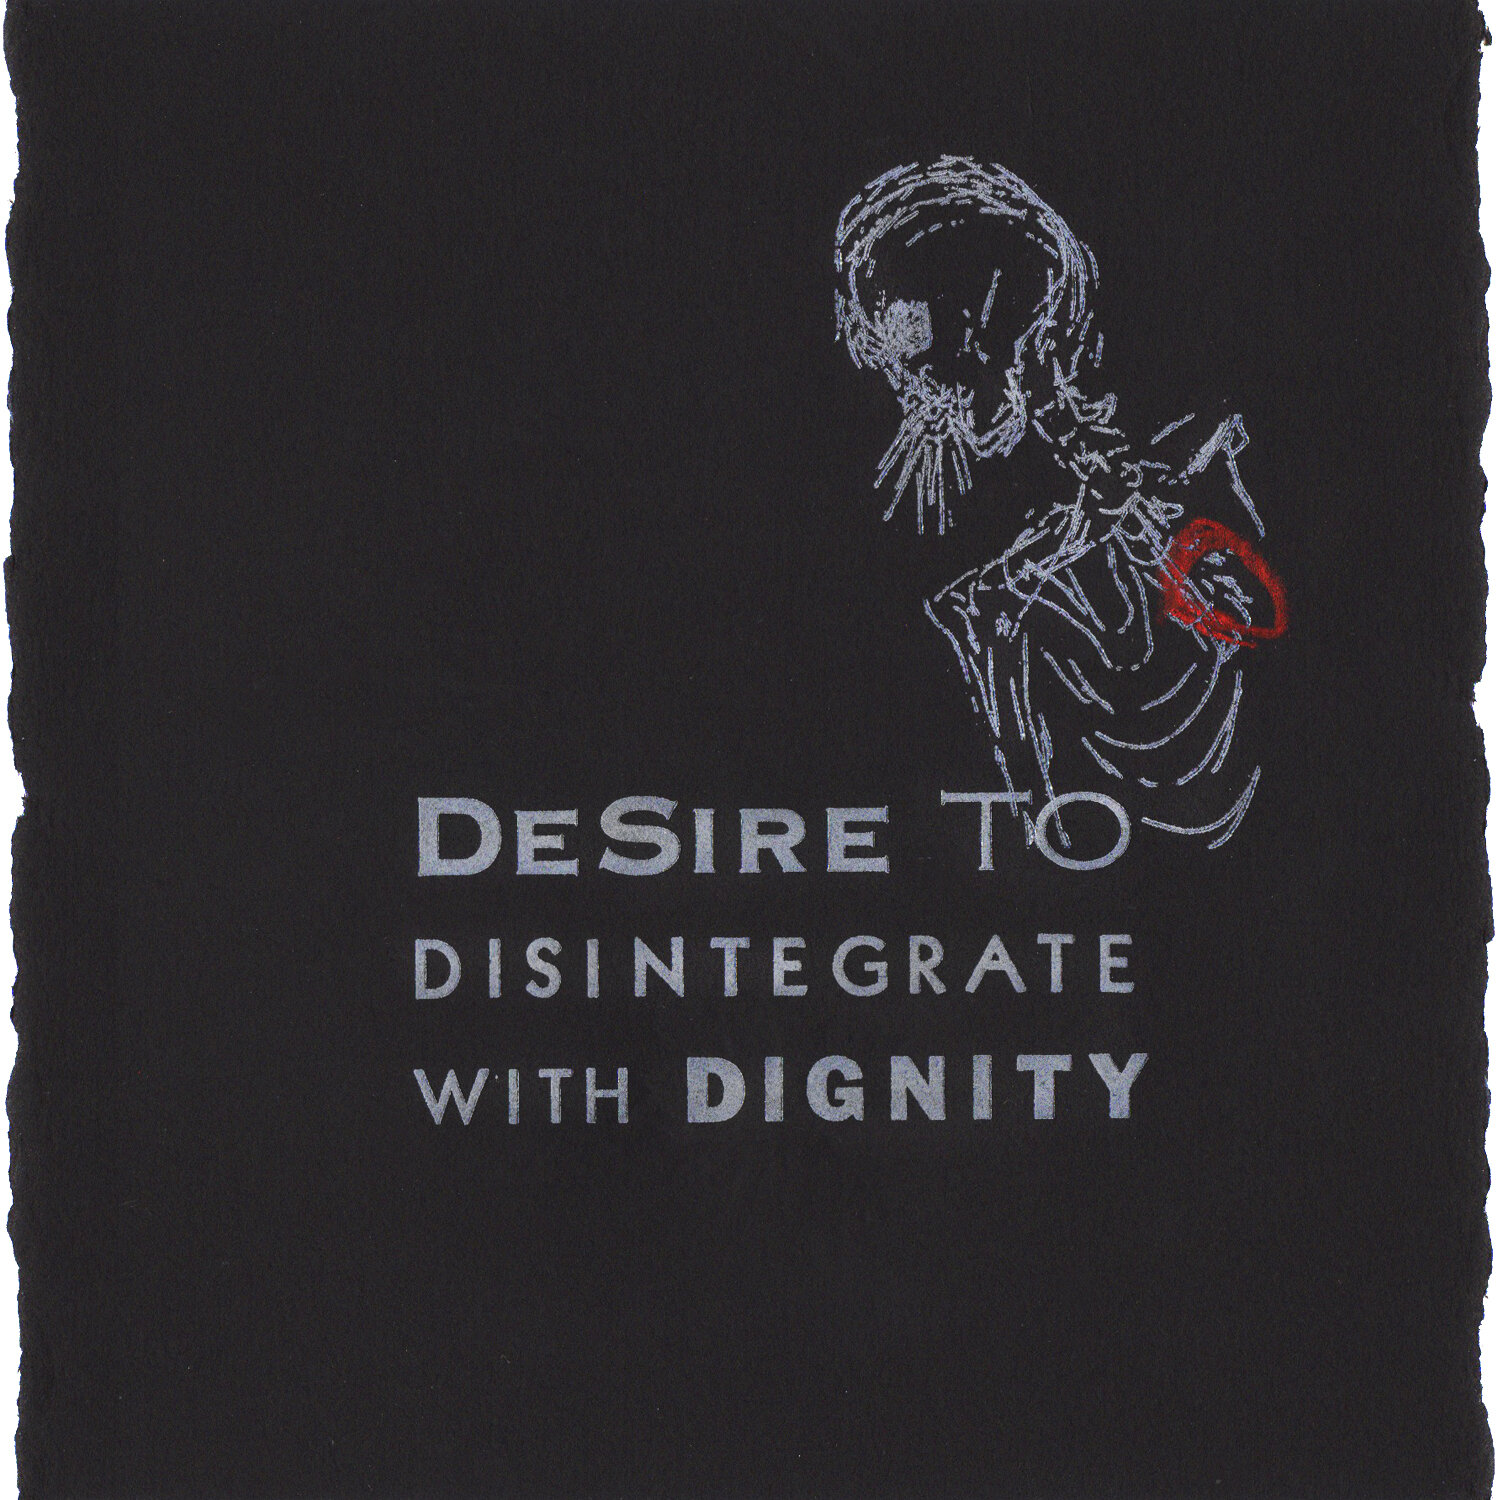 Desire to Disintegrate with Dignity (cover)